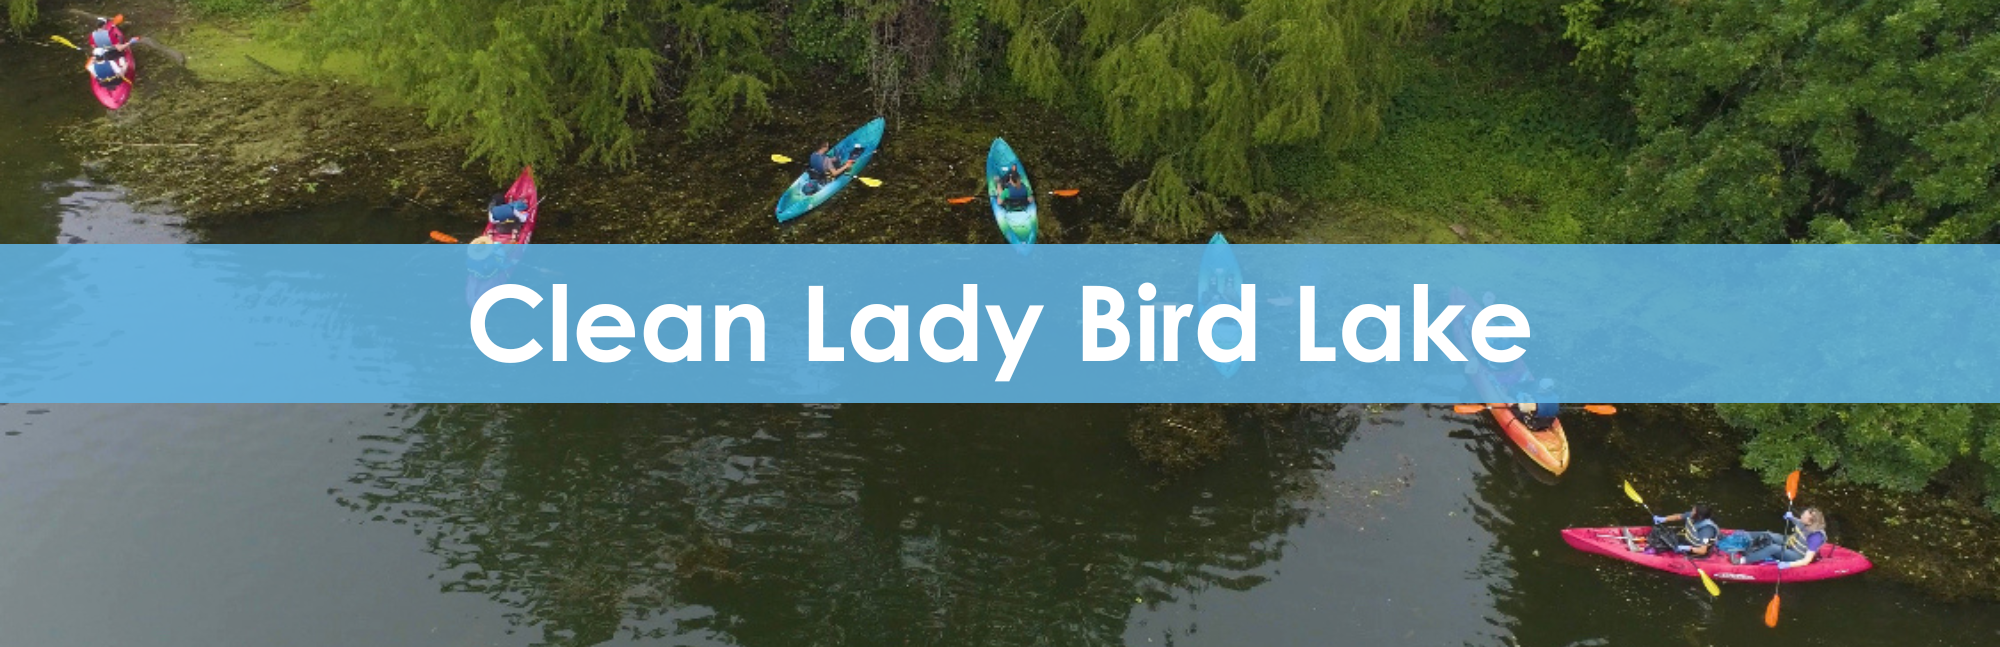 Rotary - ACRC - Website - Image - Clean Lady Bird Lake